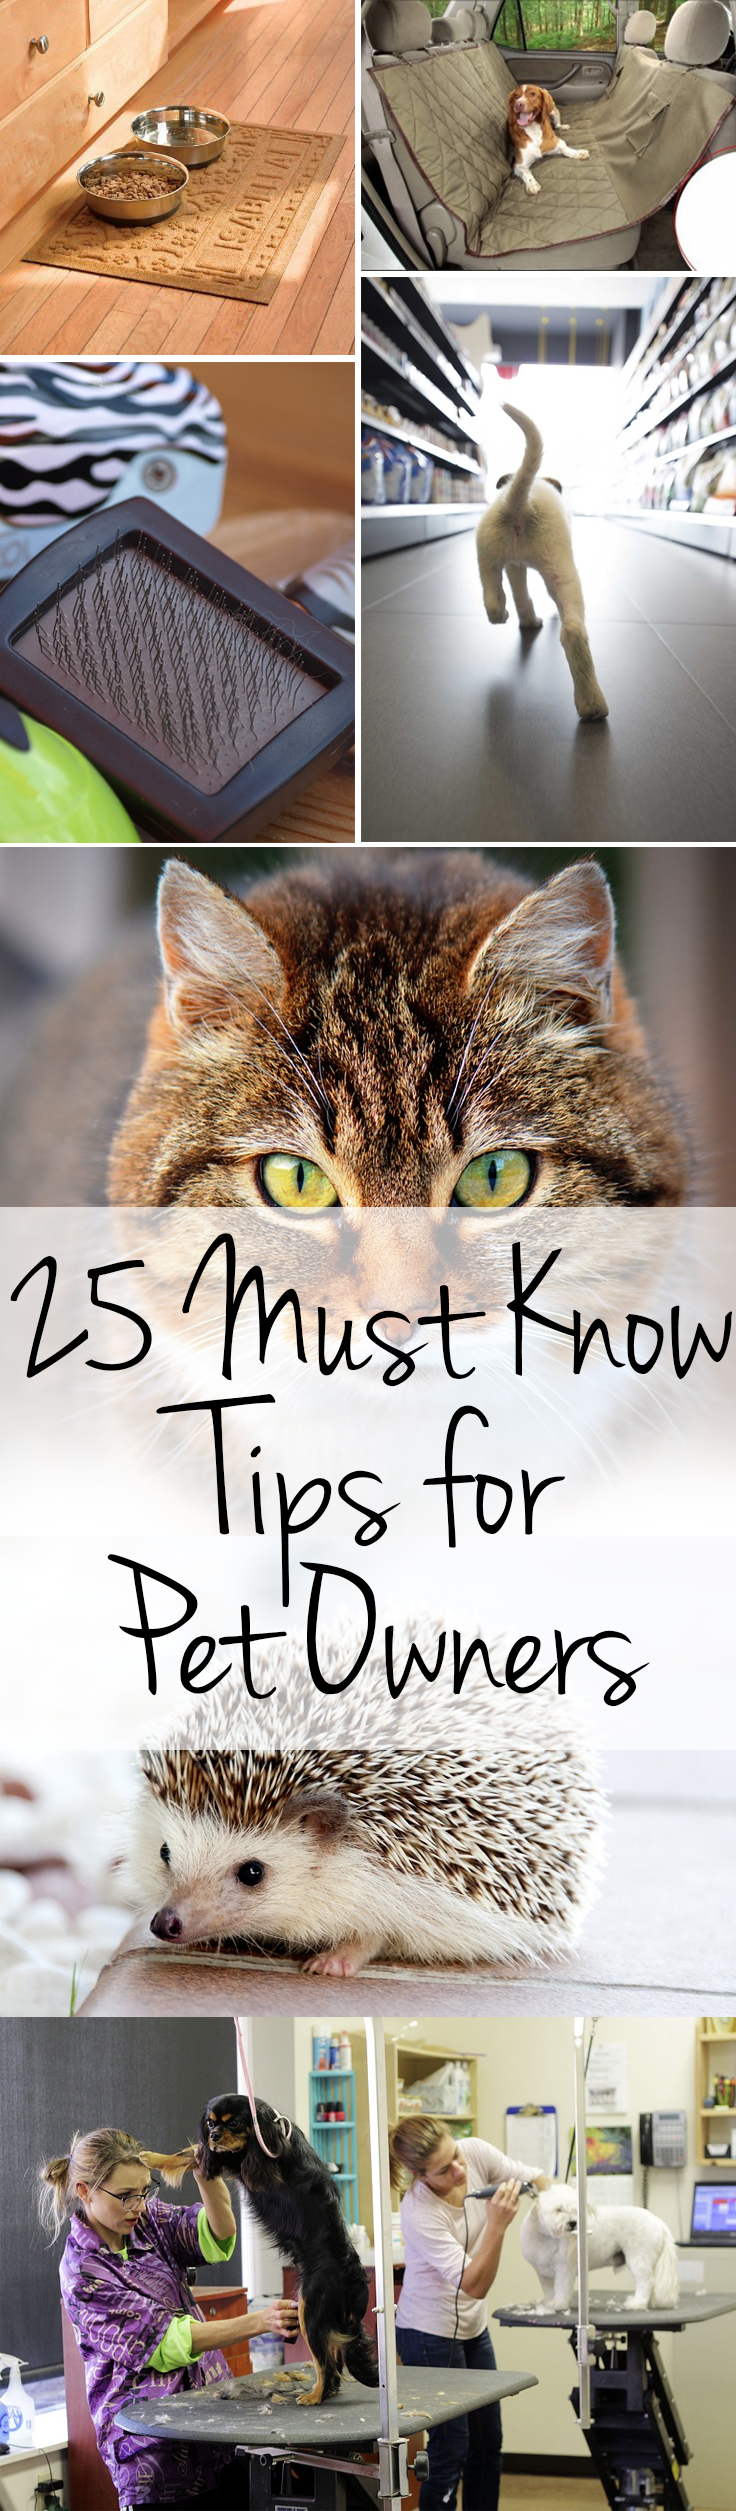 25-must-know-tips-for-pet-owners-1